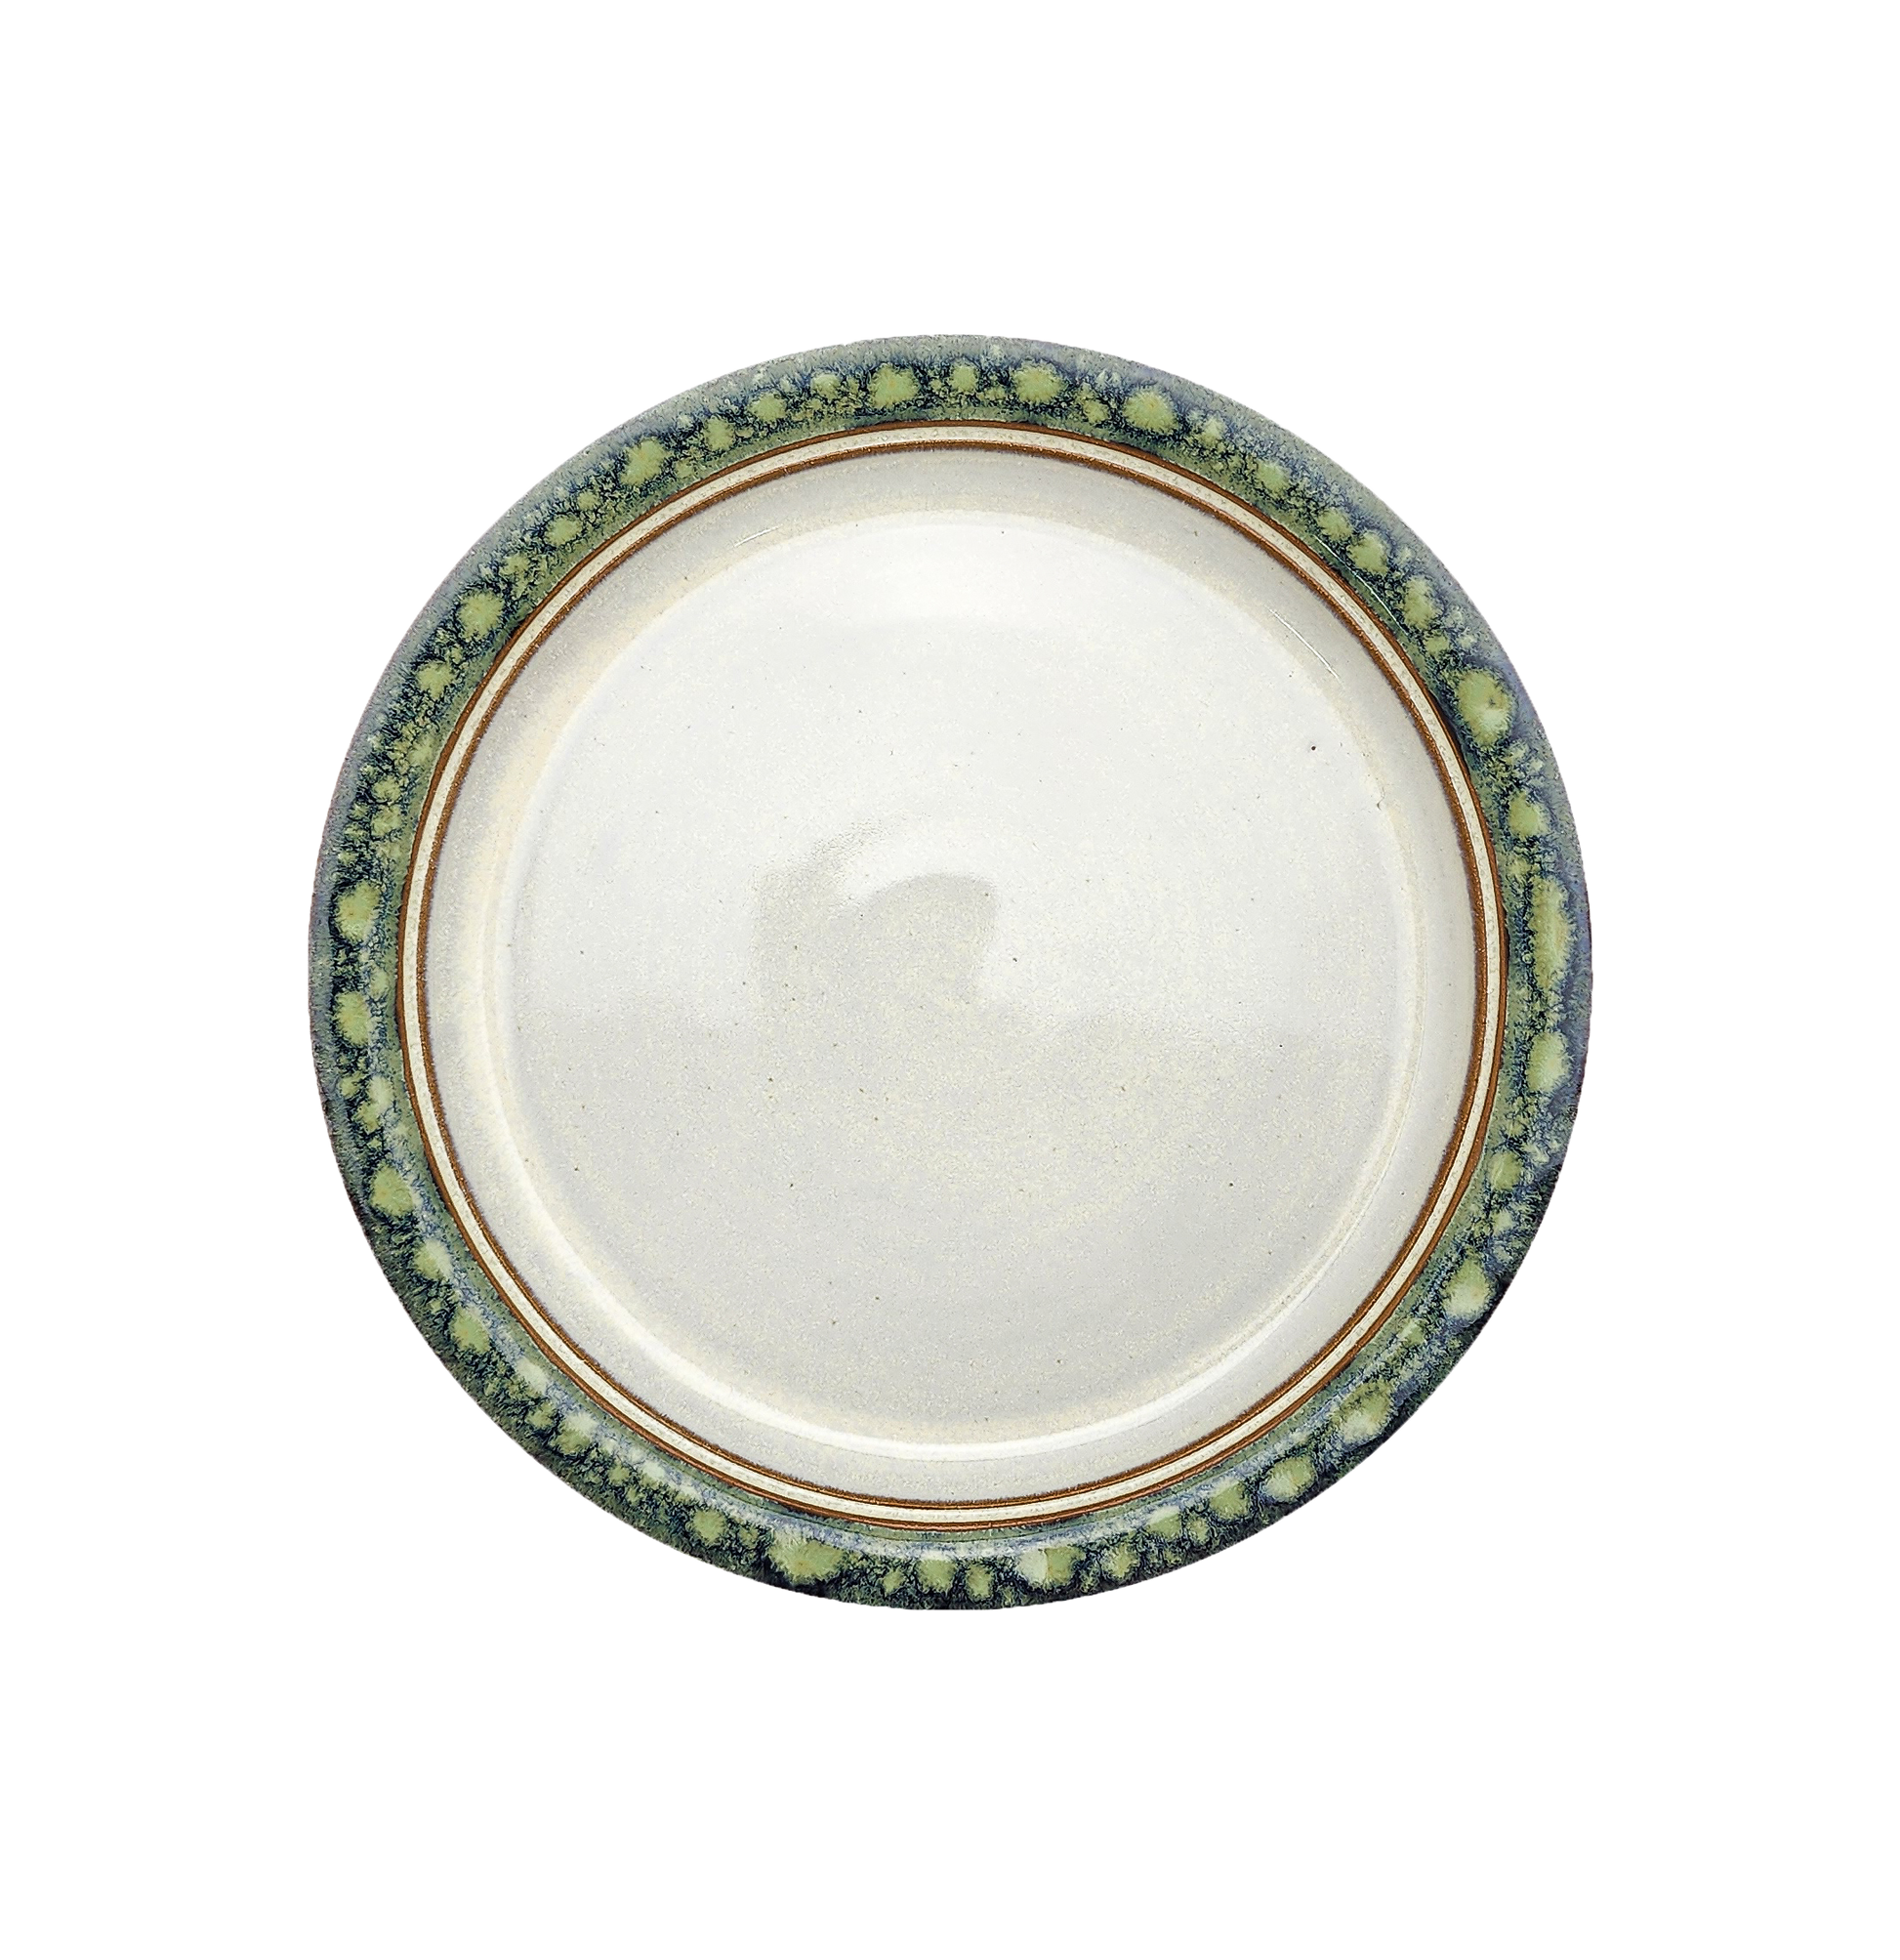 Image Description: A unique froggy bottom dinner plate from Clinton Pottery's Handmade Dinnerware Collection. The 10-inch plate showcases a one-of-a-kind glaze, combining shades of green and blue with golden undertones, reminiscent of a serene pond. Its ample size makes it a charming choice for serving a delightful dinner with a touch of nature-inspired artistry.